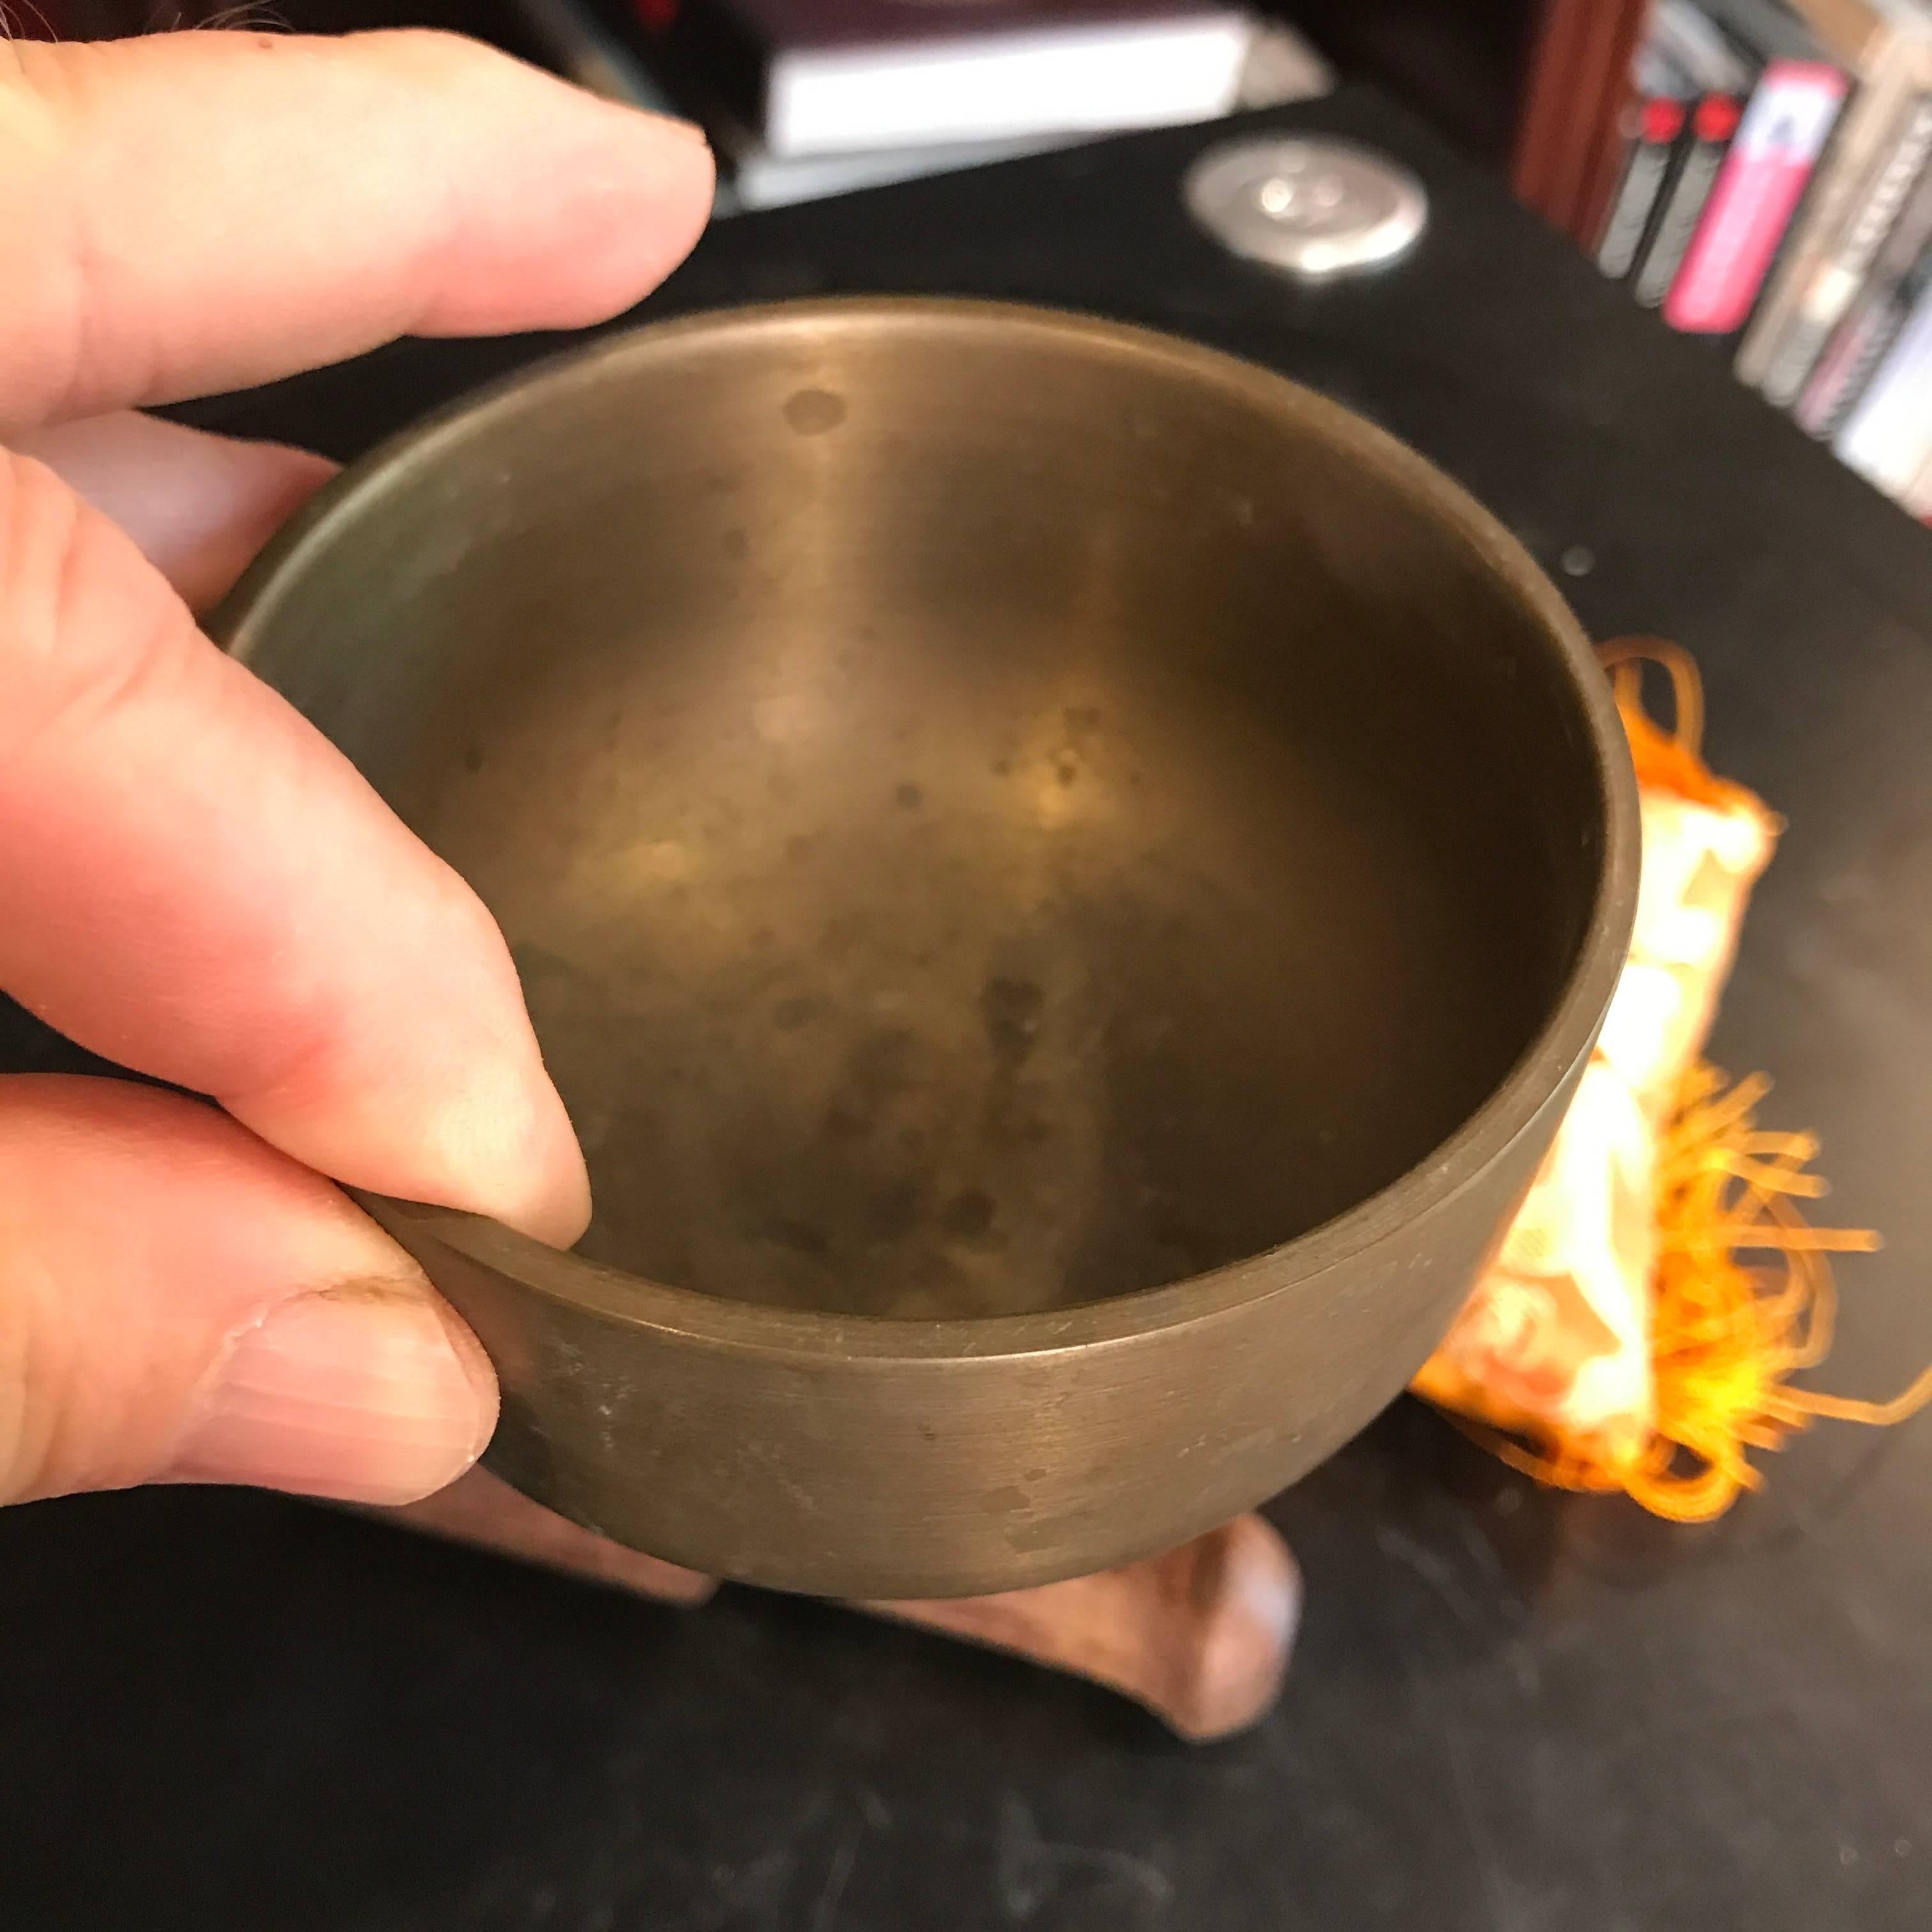 Mid-Century Modern Japan Meditation Bell Great Resonating Sound Ideal for Serene Joy, Gifts, More